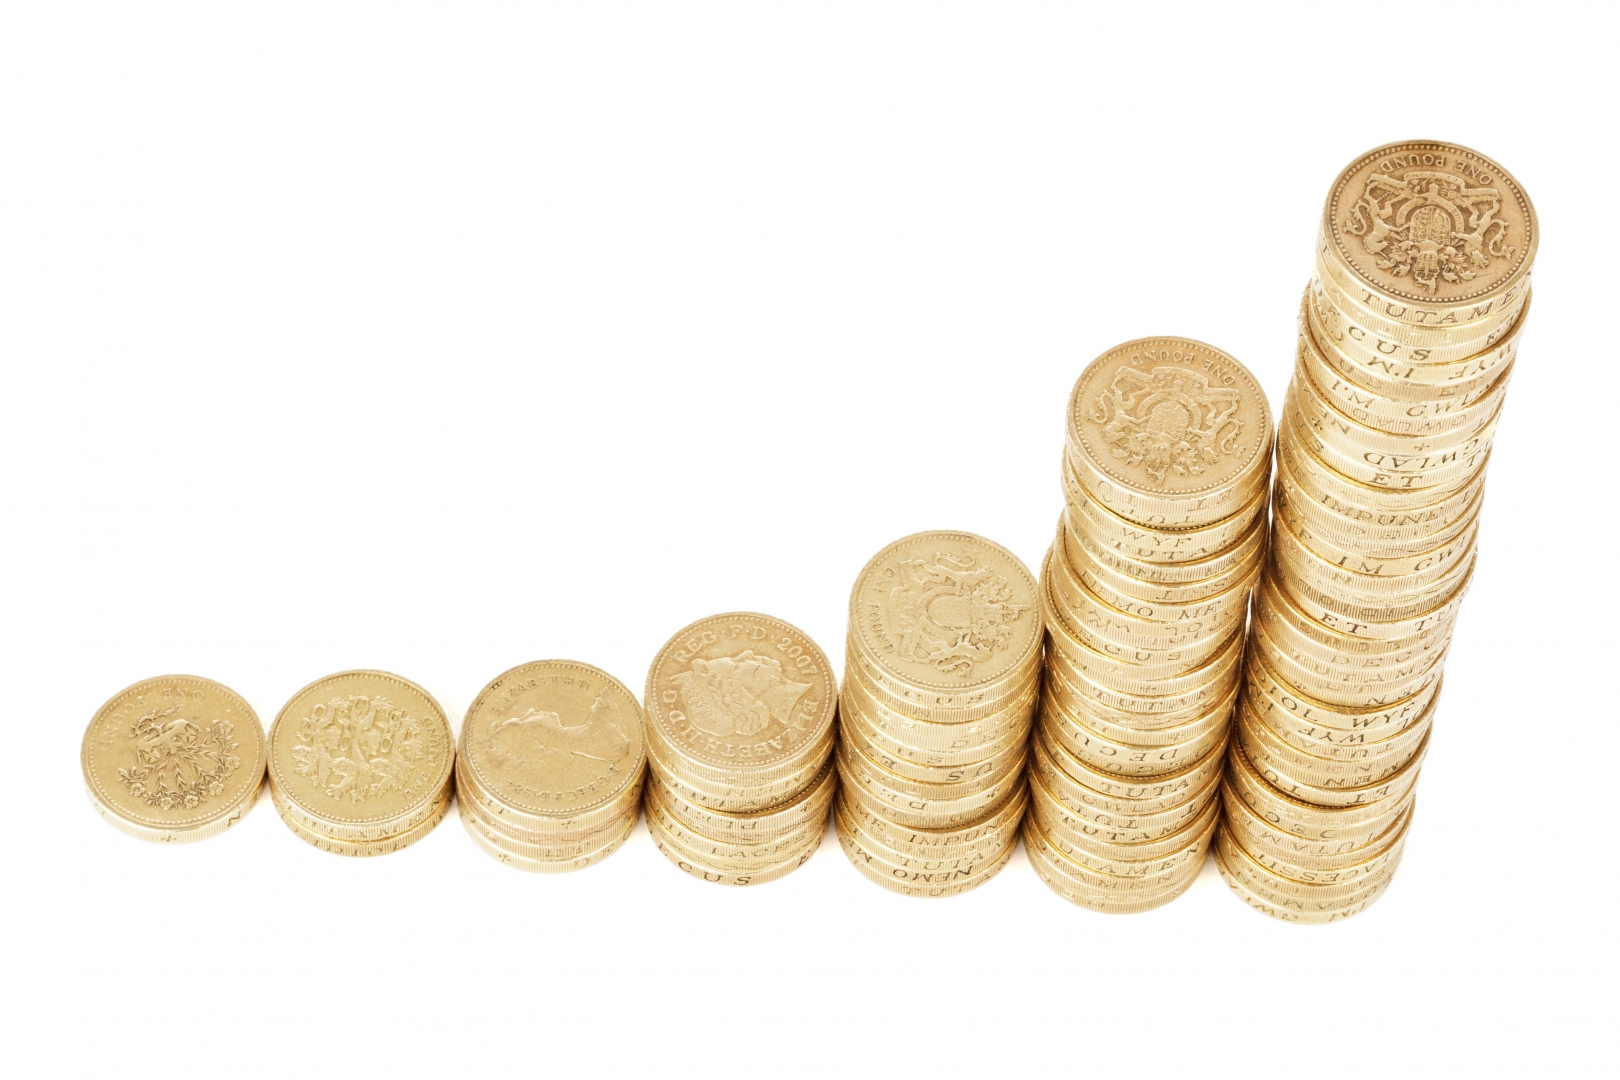 Stacks of British pound coins - A vocabulary guide to British money